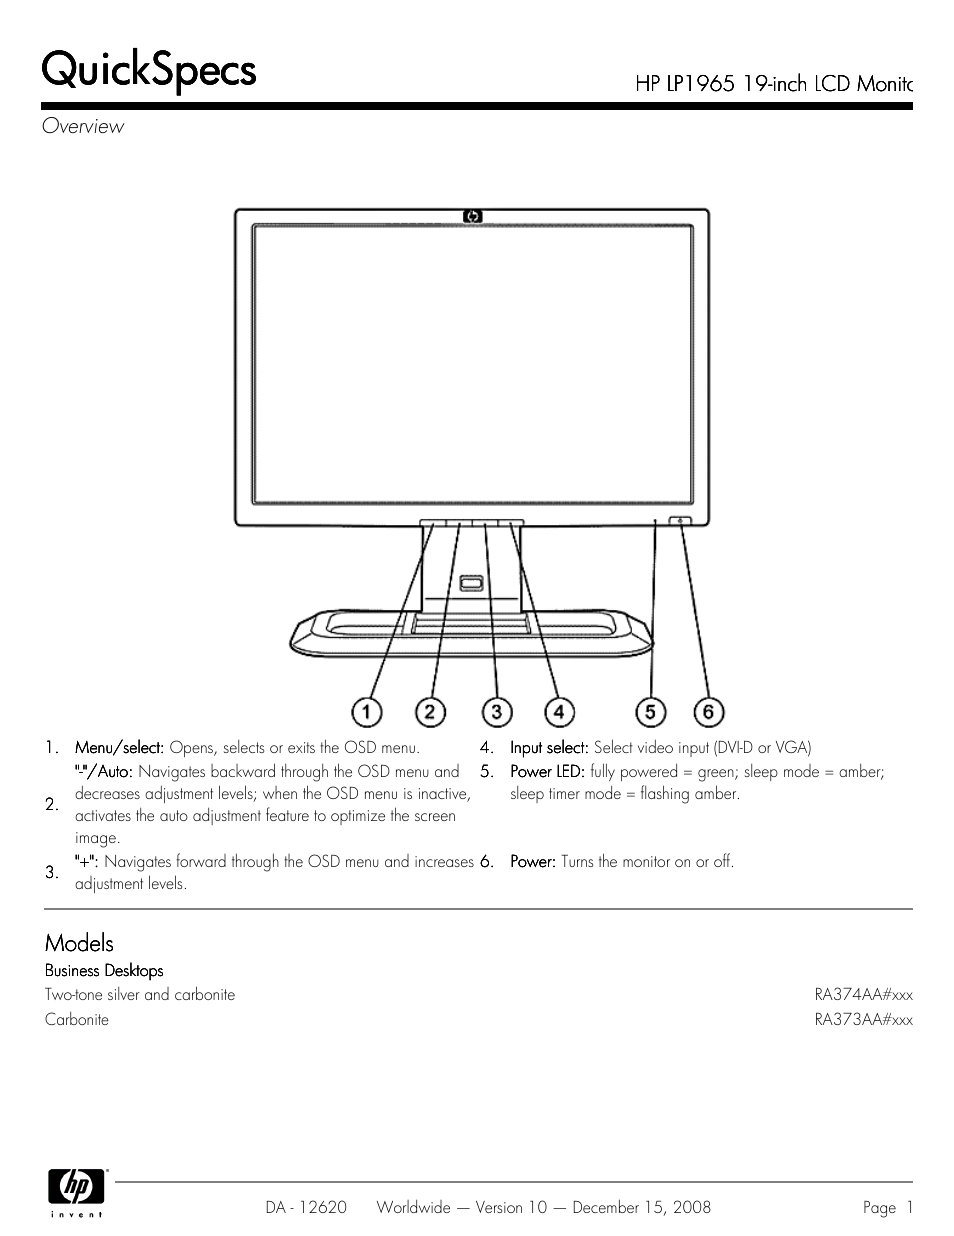 HP 19 INch LCD Monitor LP1965 User Manual | 11 pages